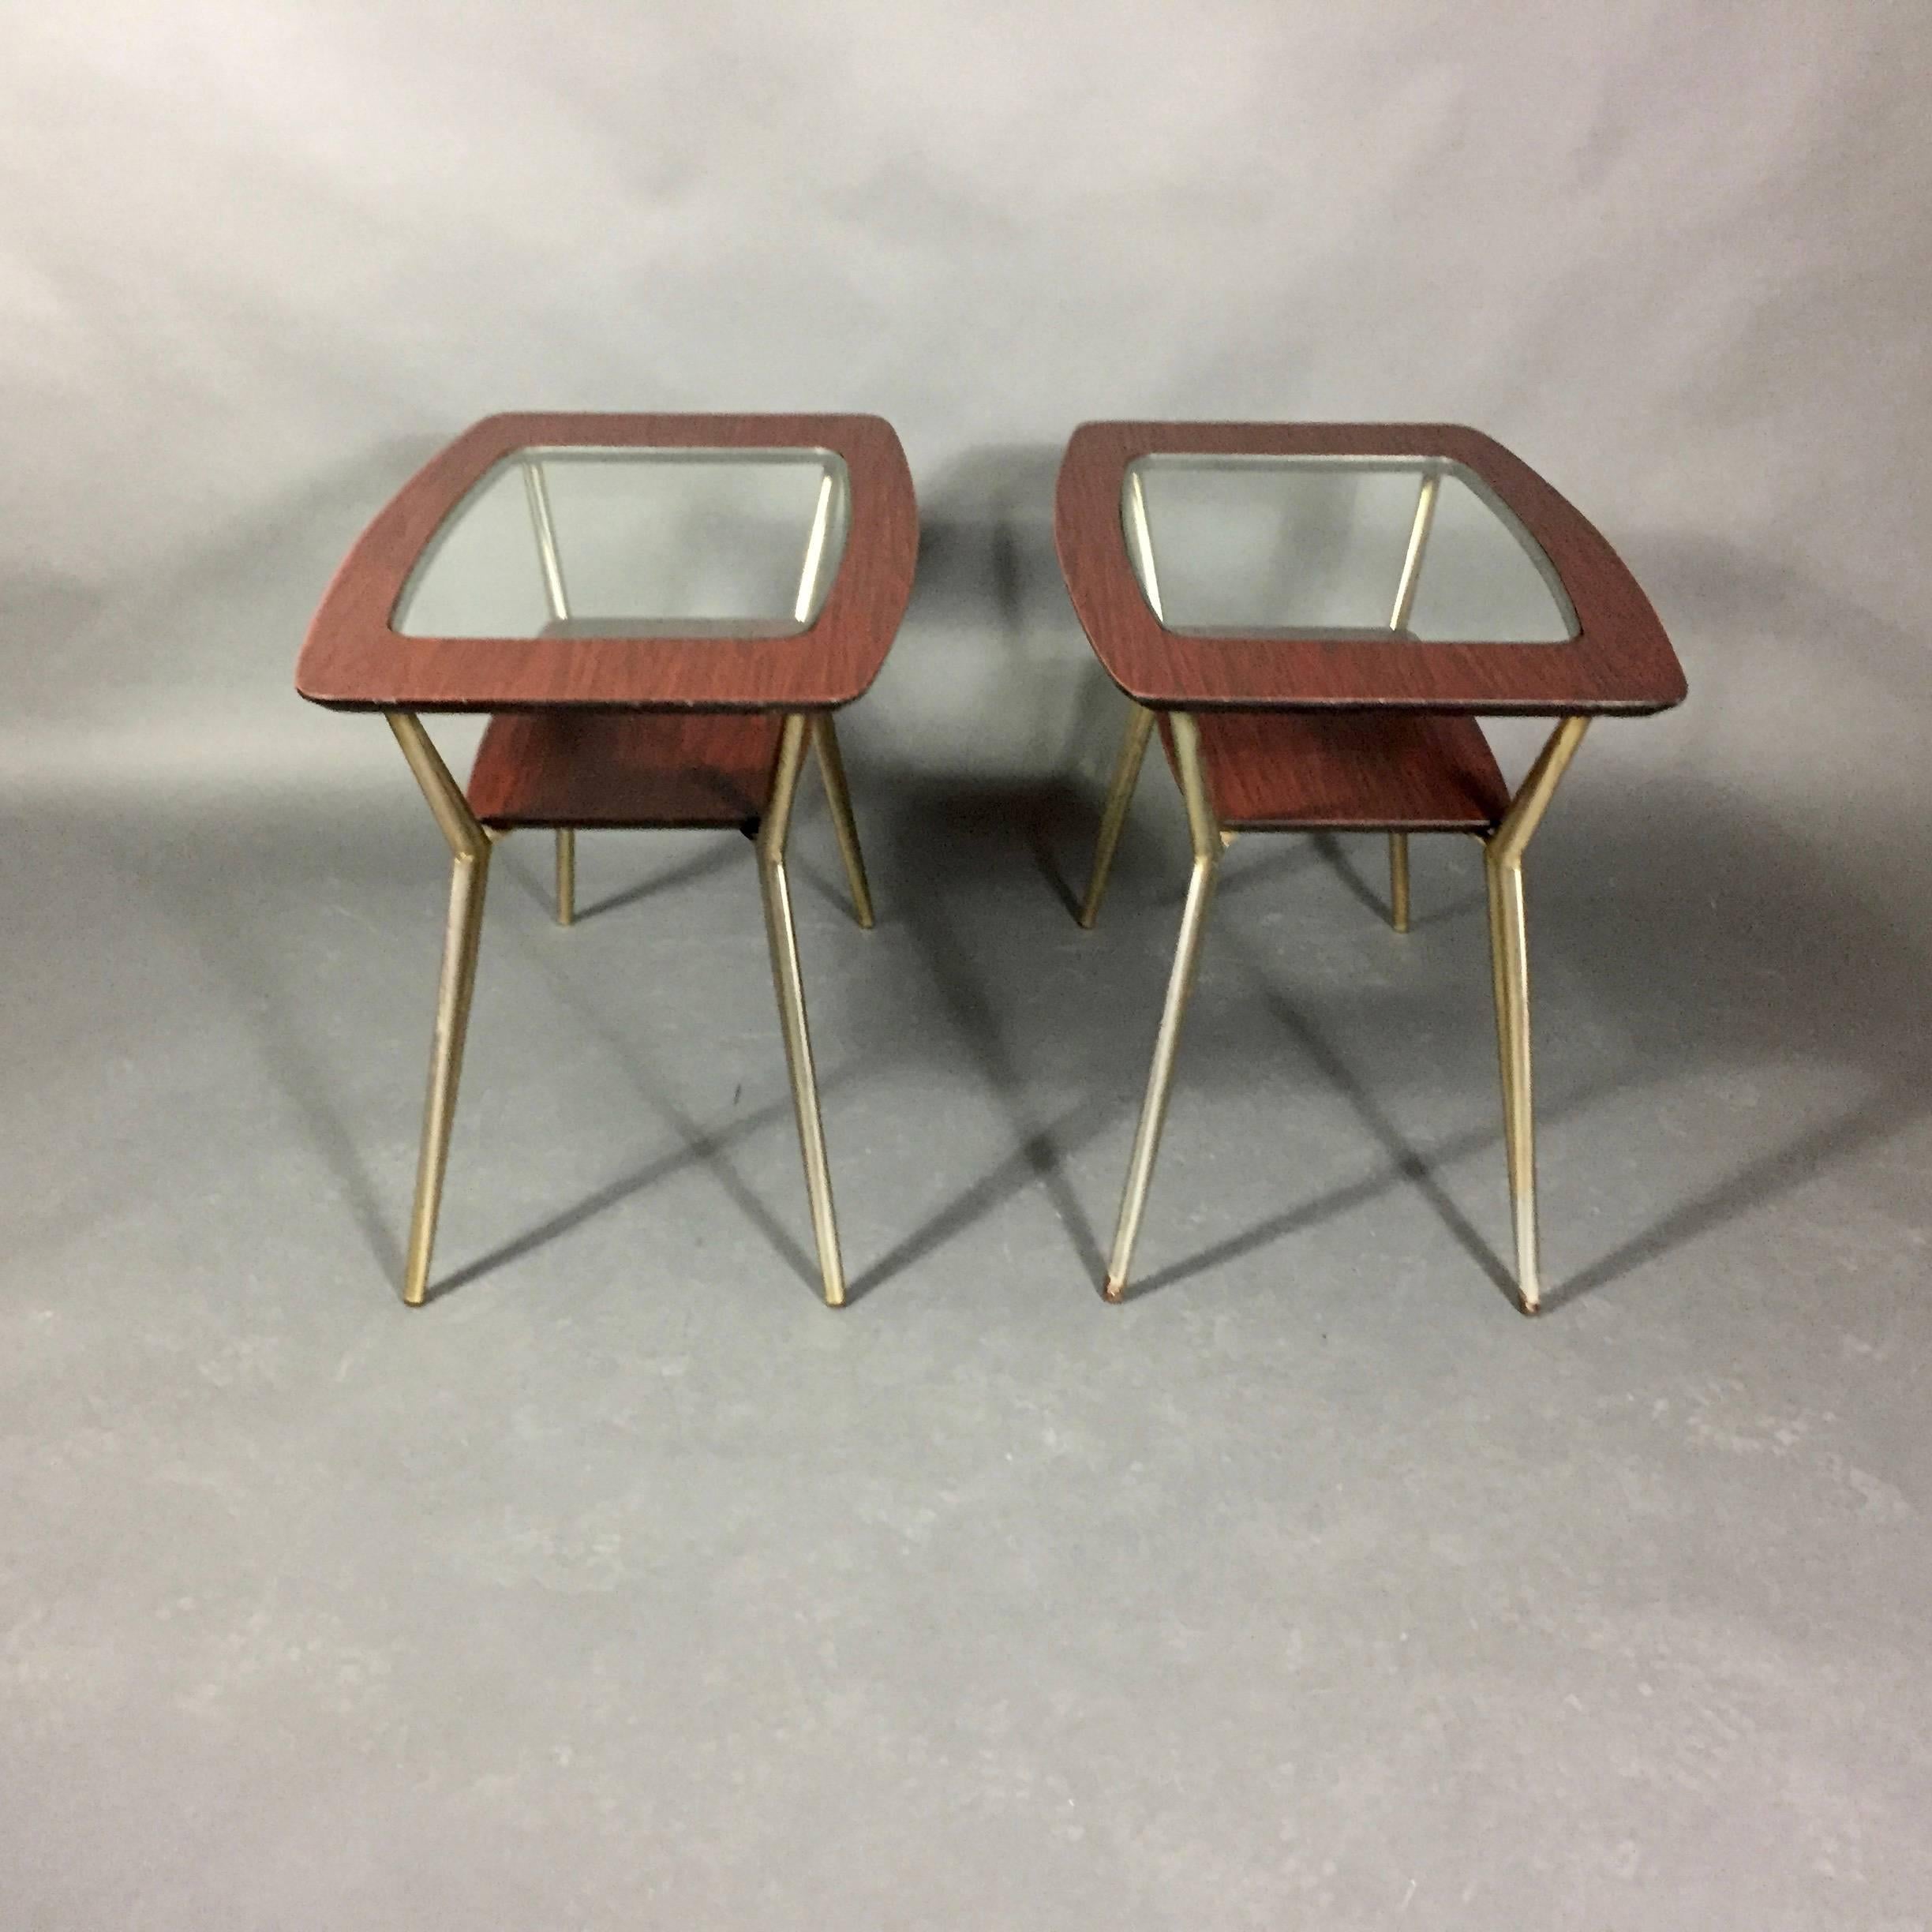 Pair of Atomic Metal and Glass Side Tables, USA, 1970 For Sale 3